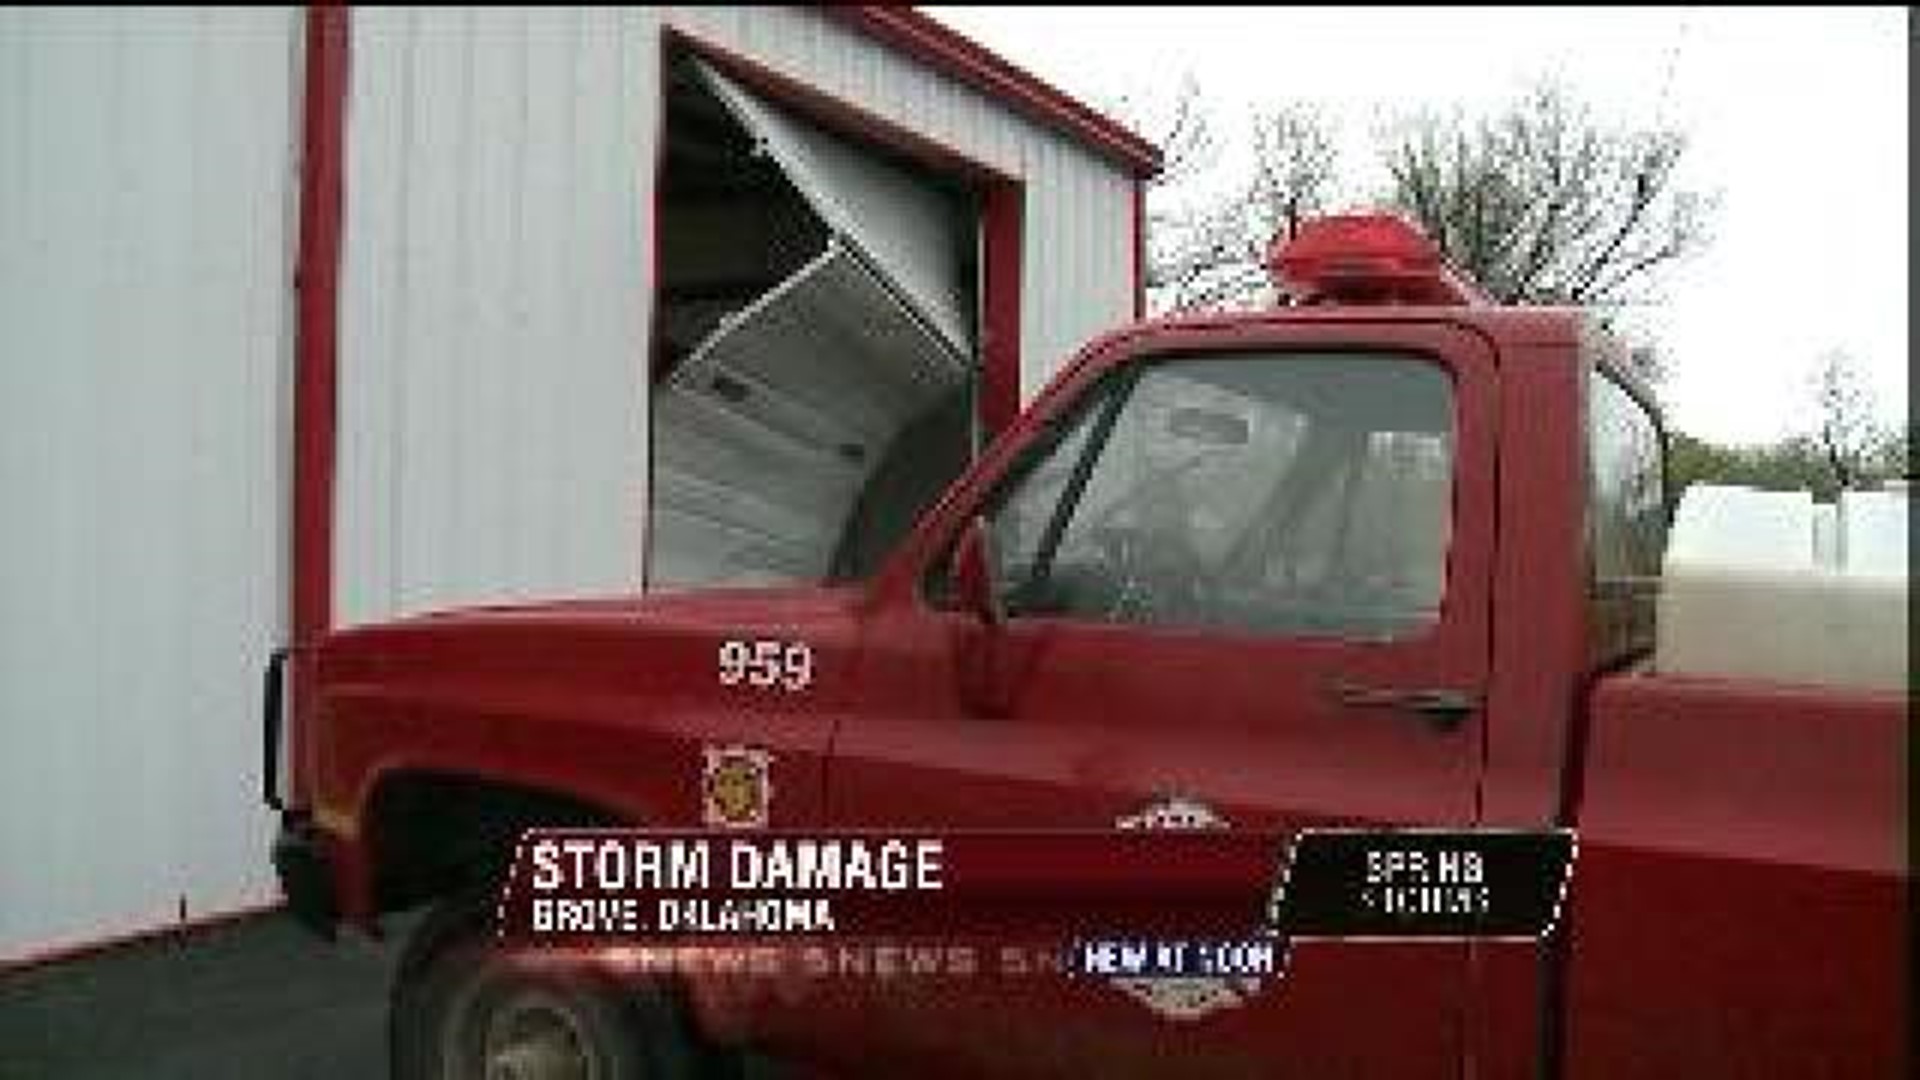 Fire Station Damaged by Possible Tornado